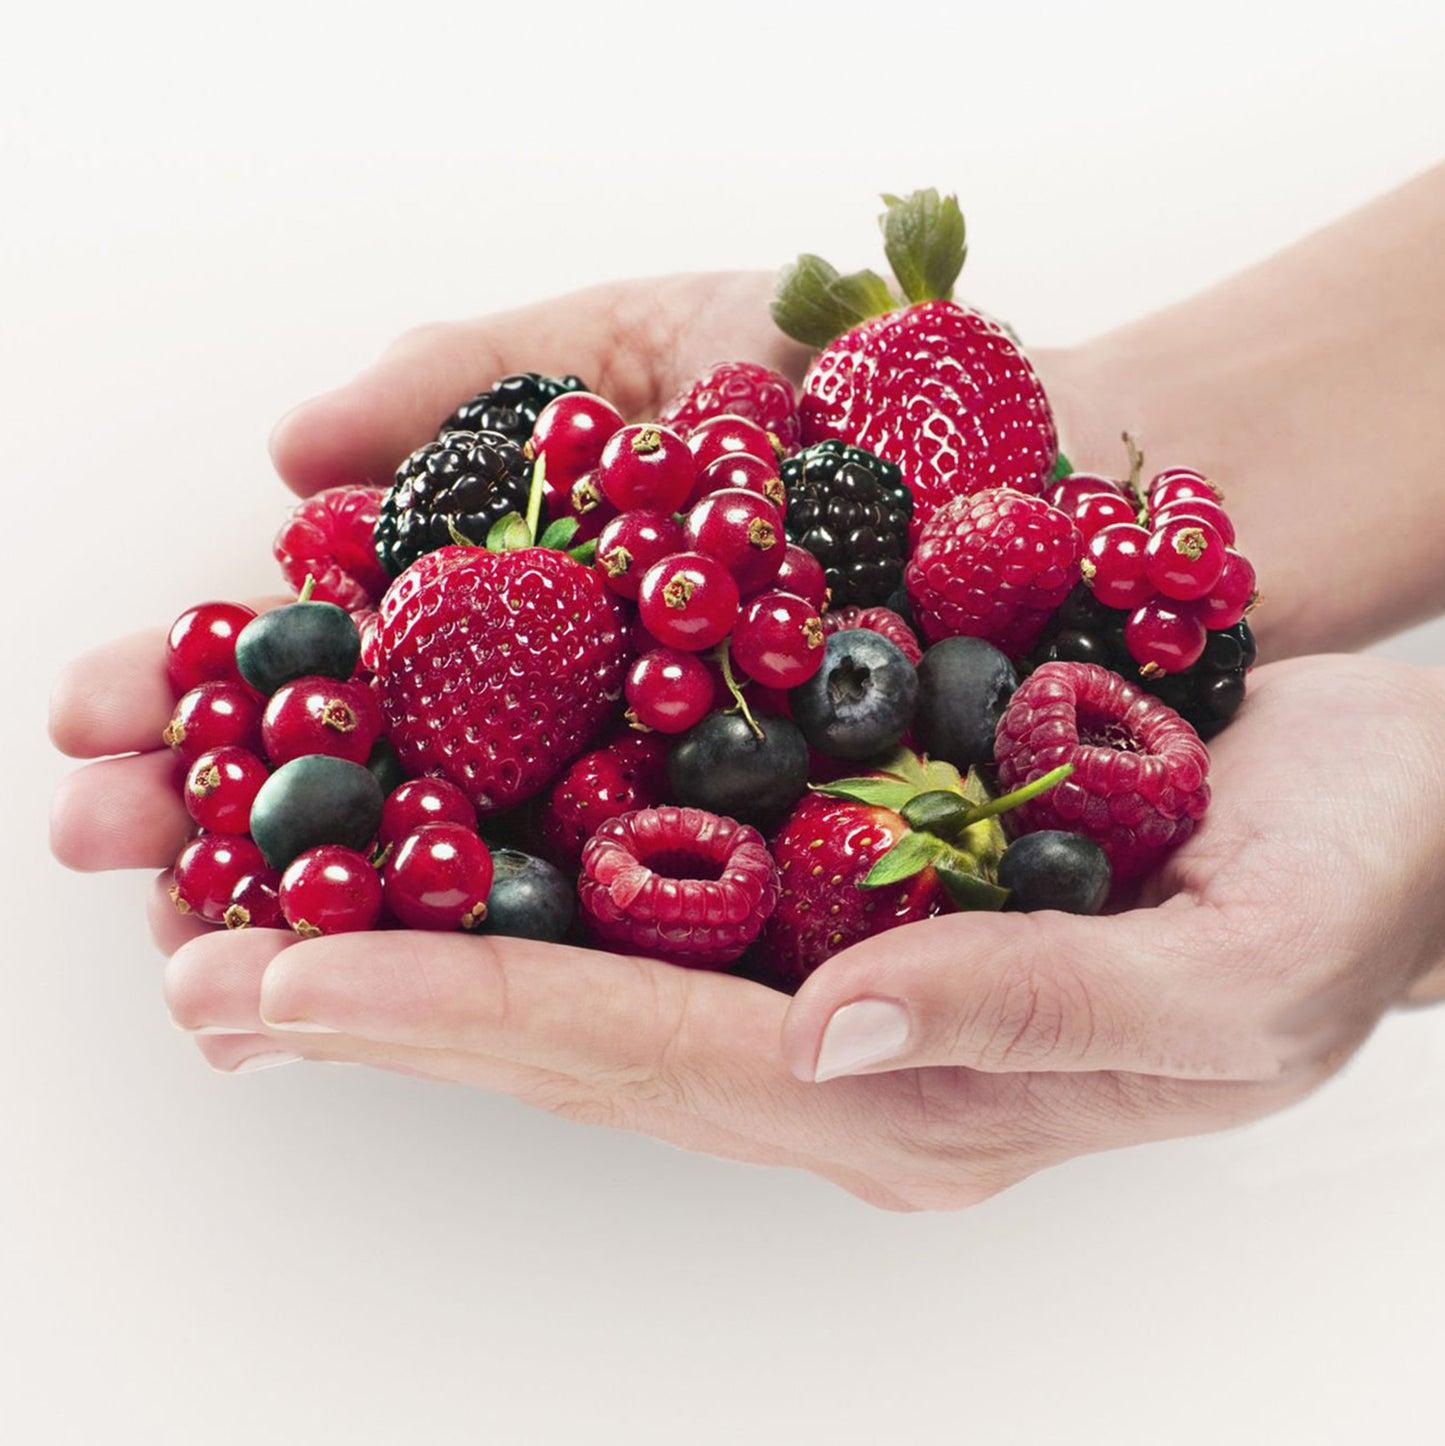 The Nutritional Benefits of Berries: Why They Should be a Part of Your Diet